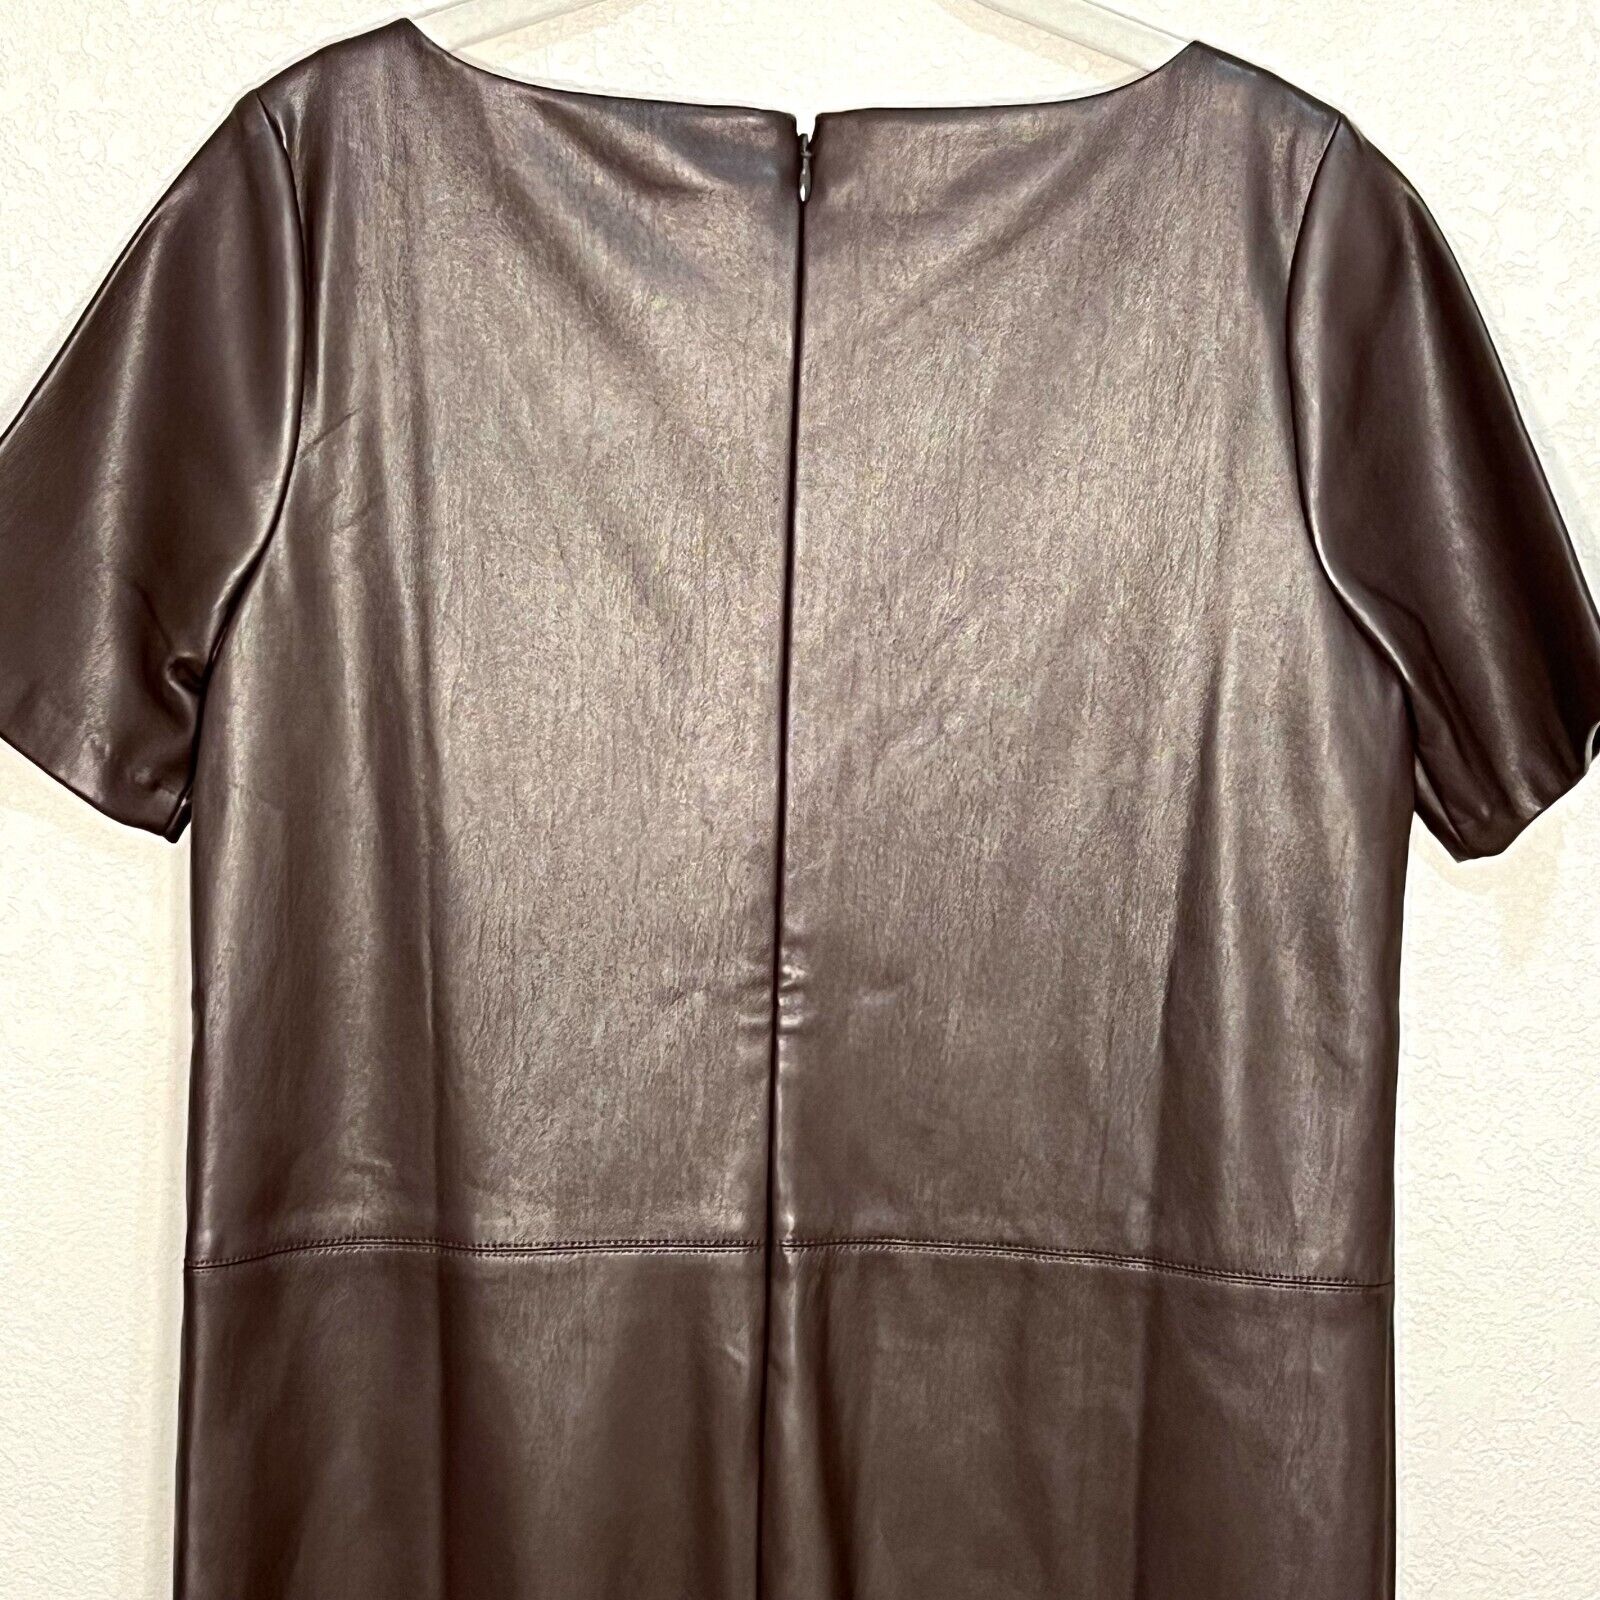 Ann Taylor Brown Seamed Faux Leather Shift Dress Size 4